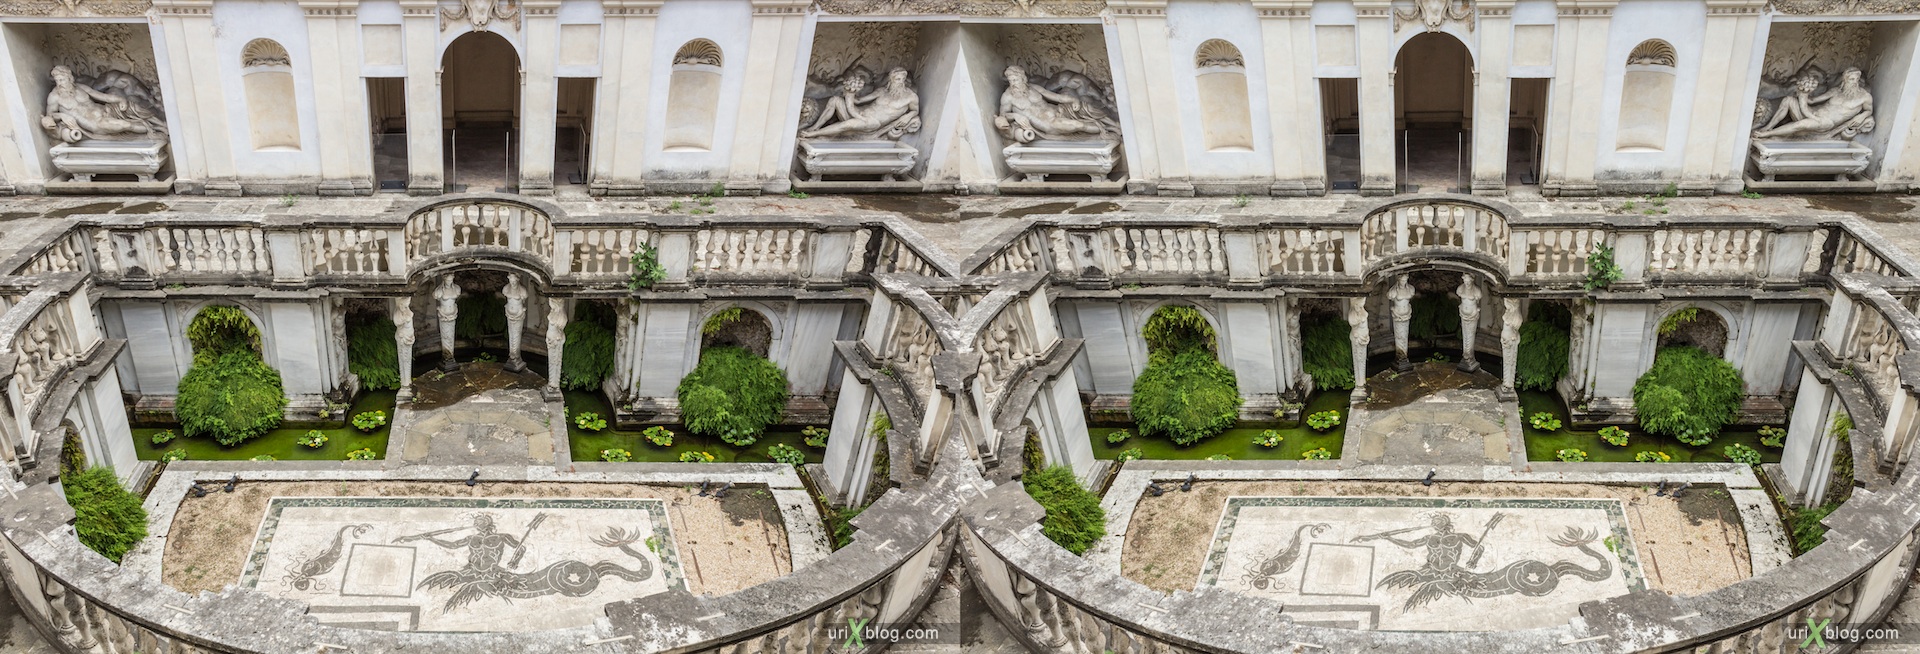 2012, Villa Giulia, Etruscan Museum, Rome, Italy, 3D, stereo pair, cross-eyed, crossview, cross view stereo pair